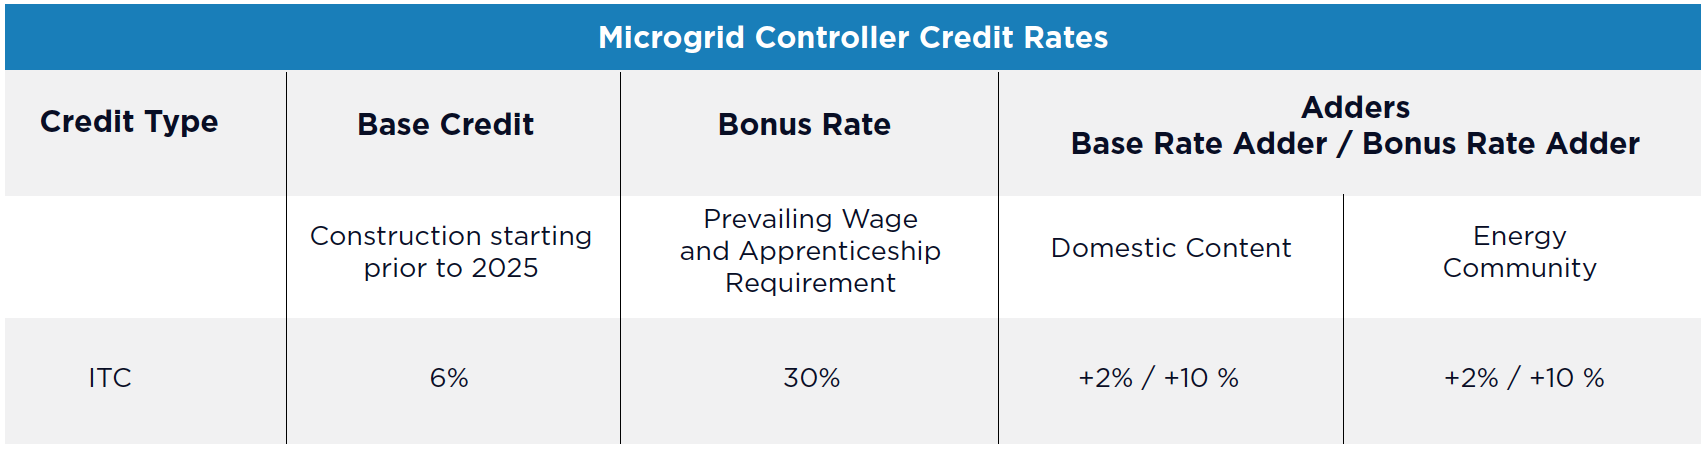 Advanced Microgrid Controller Credit Rates